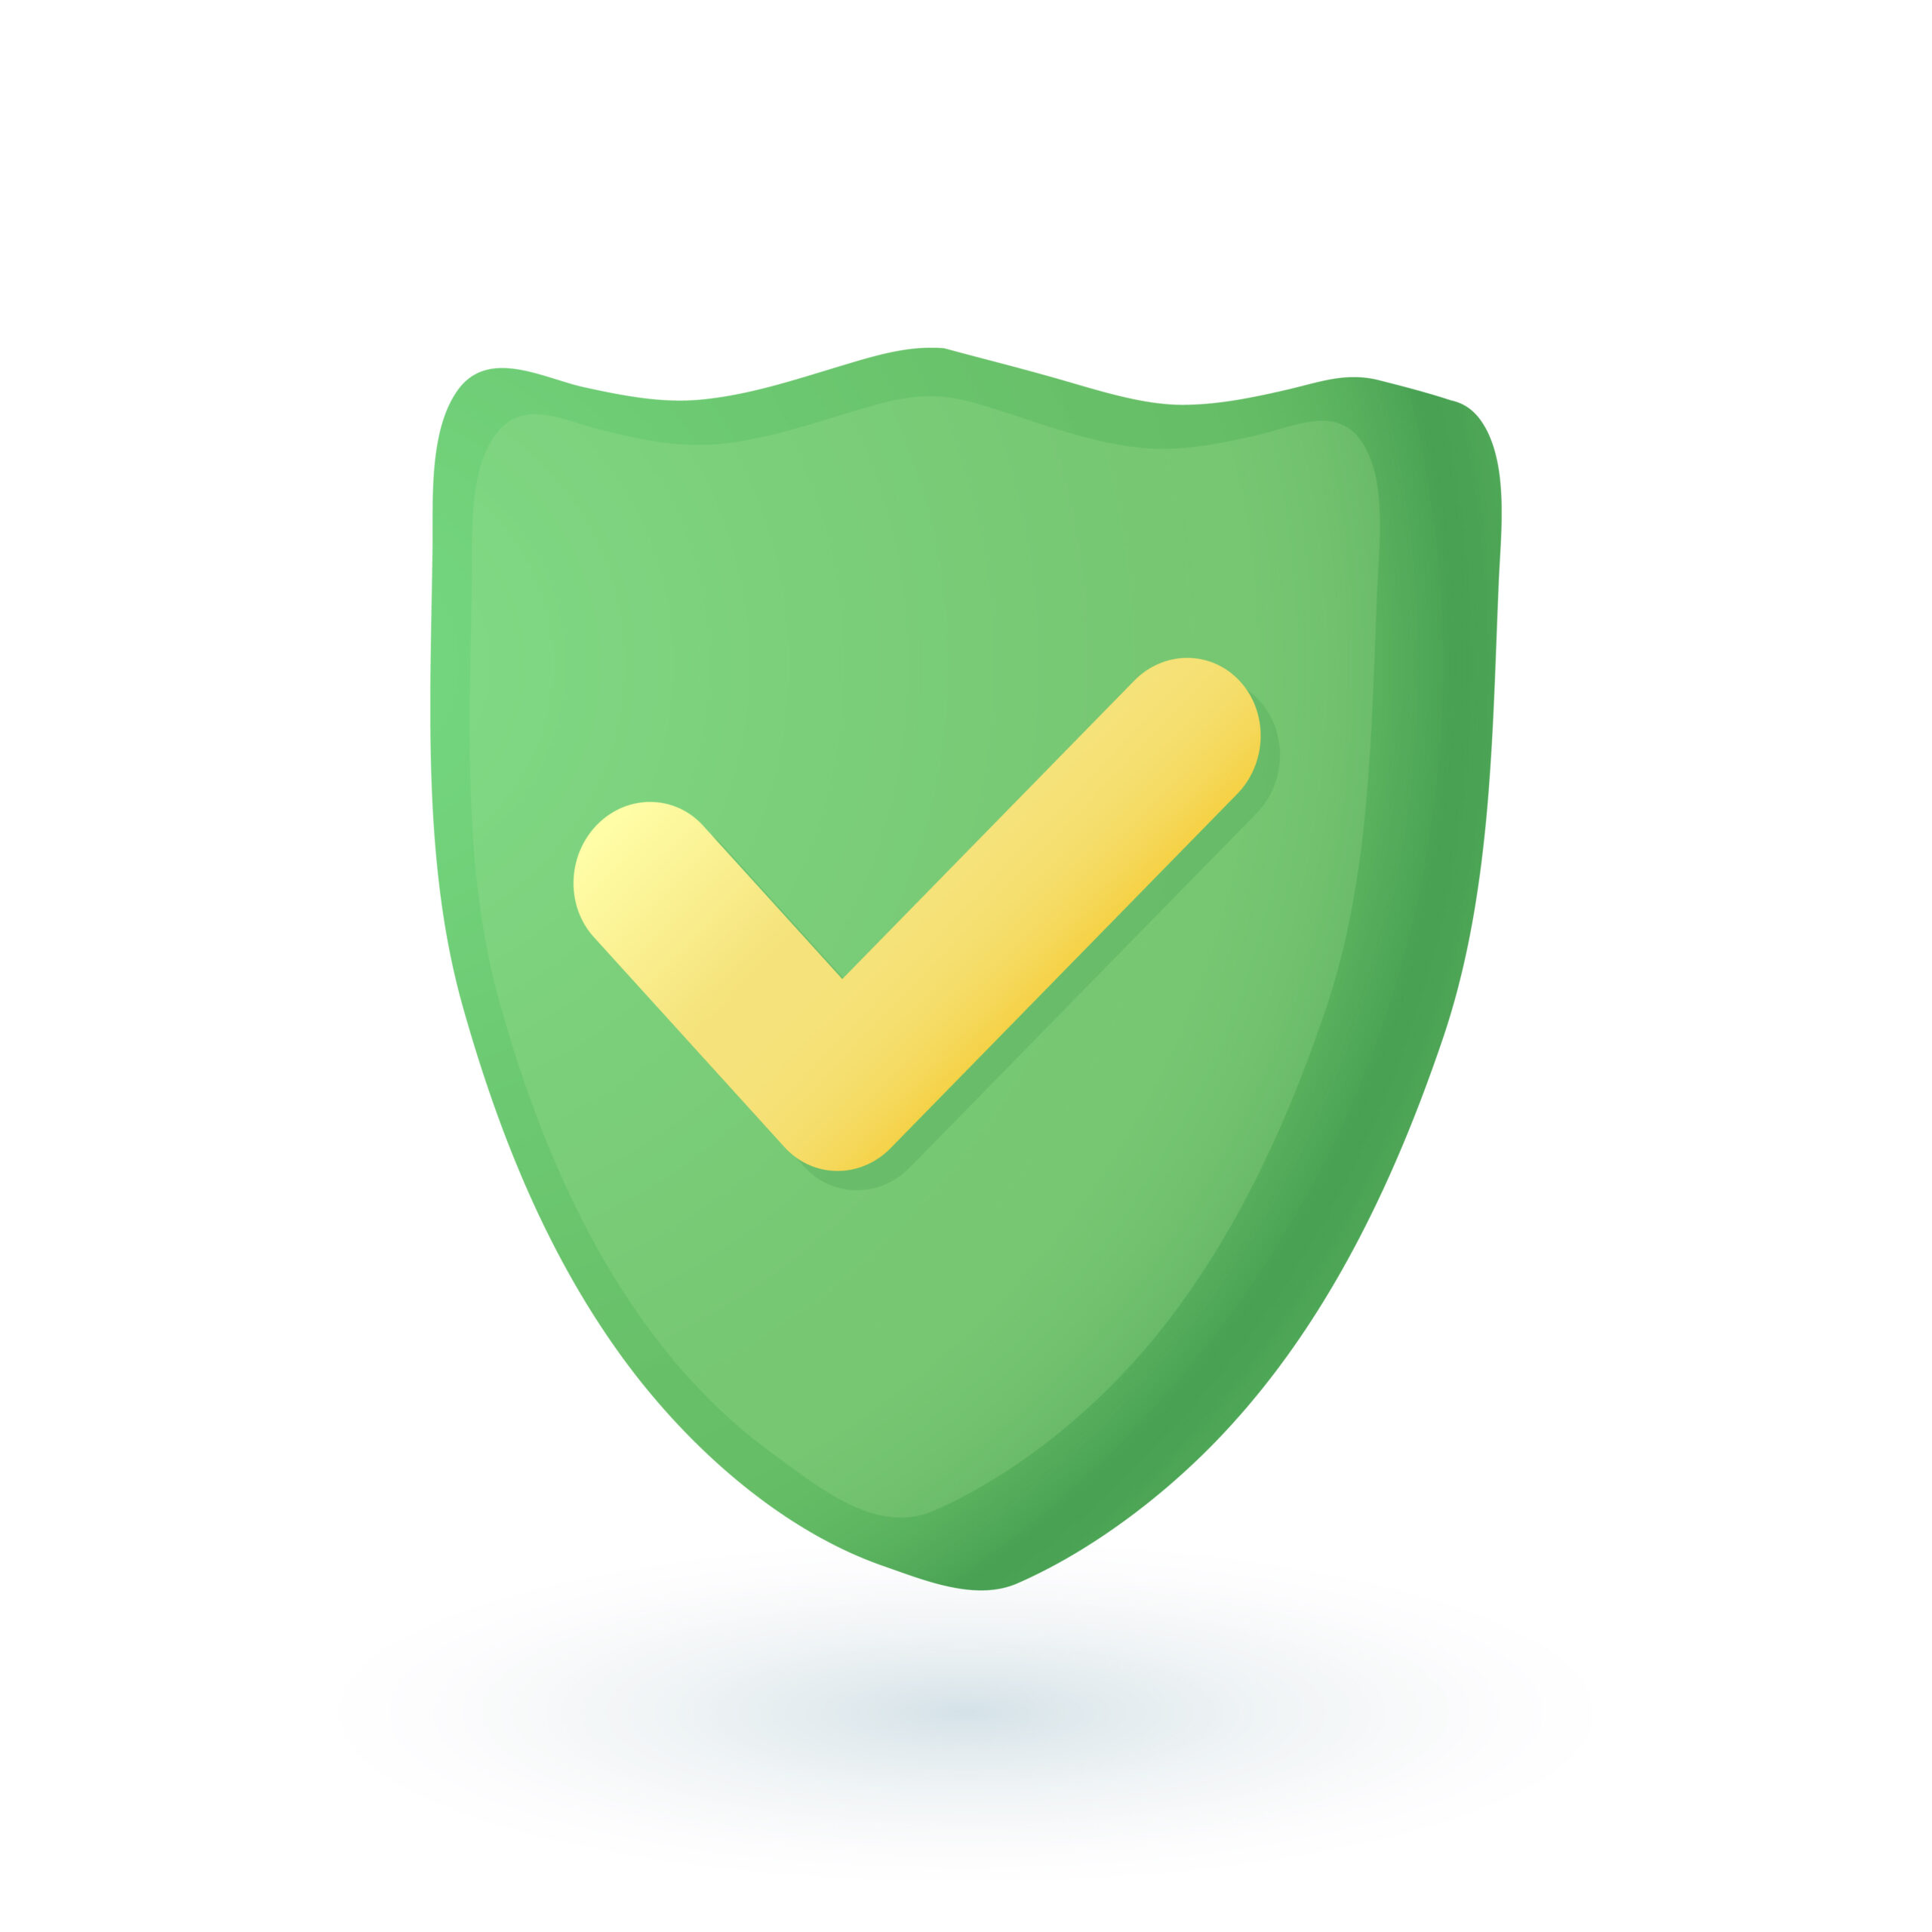 3d cartoon style green shield with checkmark icon. Realistic security symbol with tick, protection of personal data flat vector illustration. Protection, safety, guarantee, privacy concept